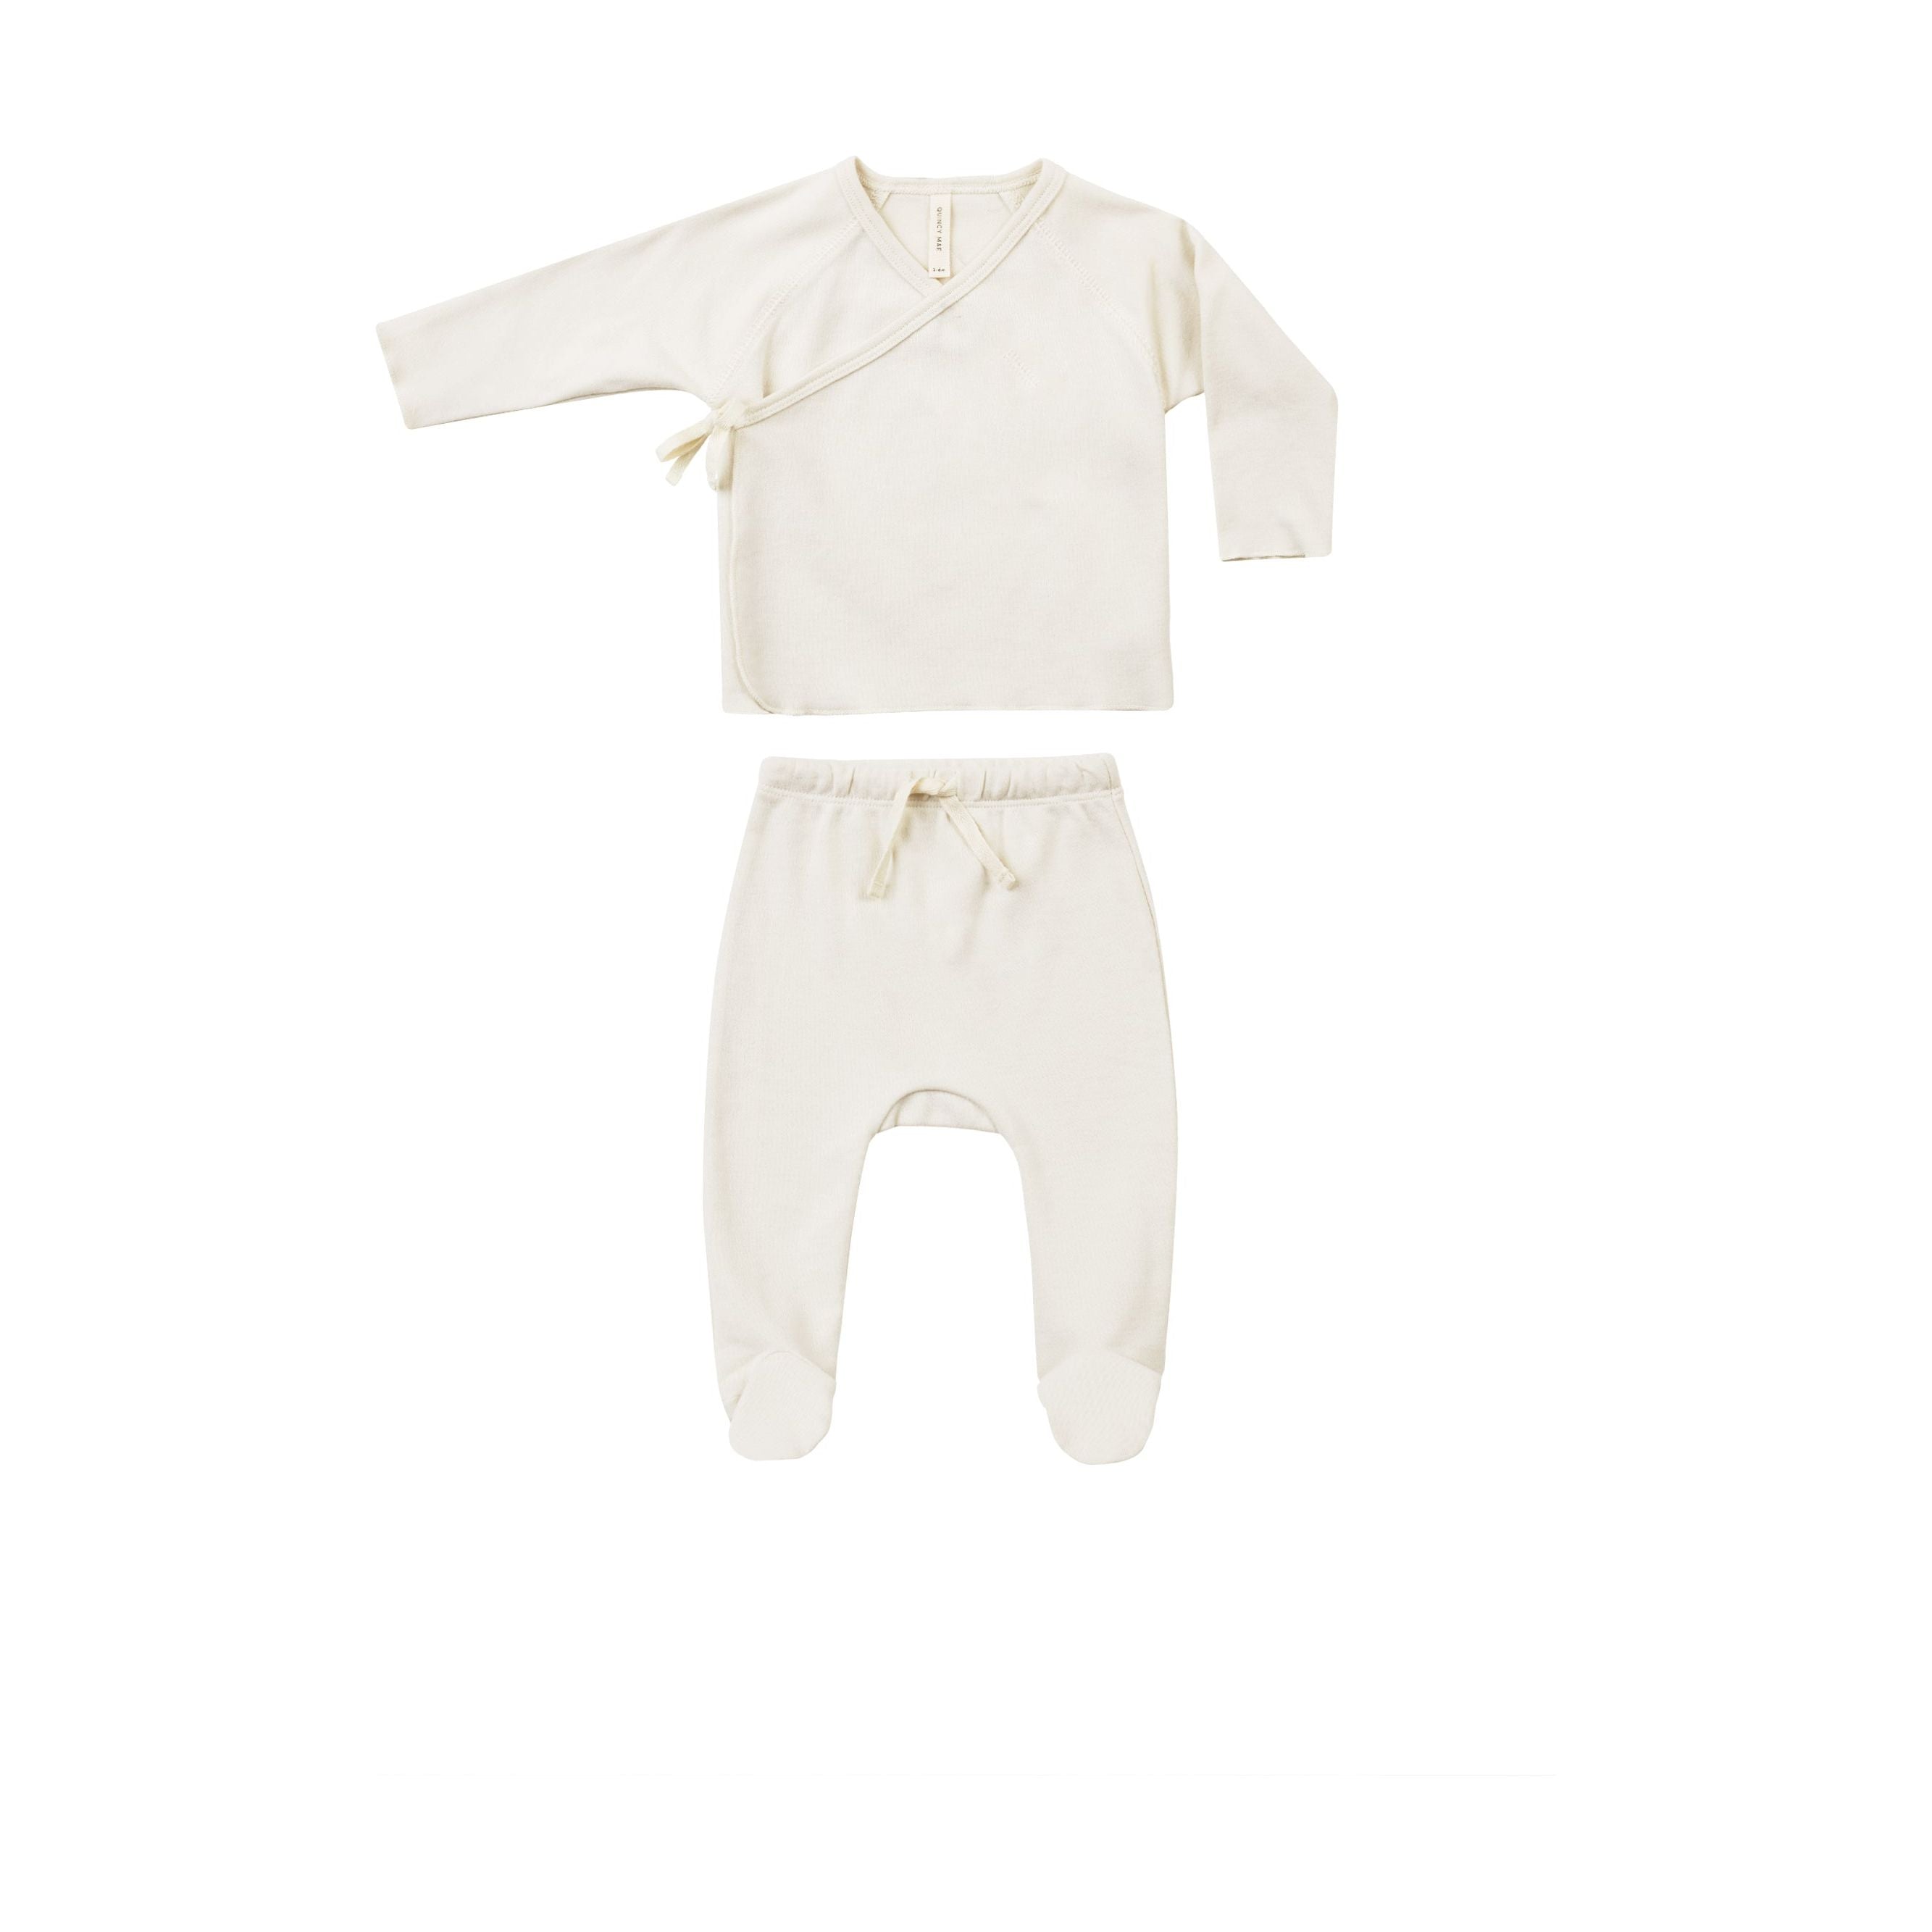 Wrap Top/Footed Pant Set - Ivory